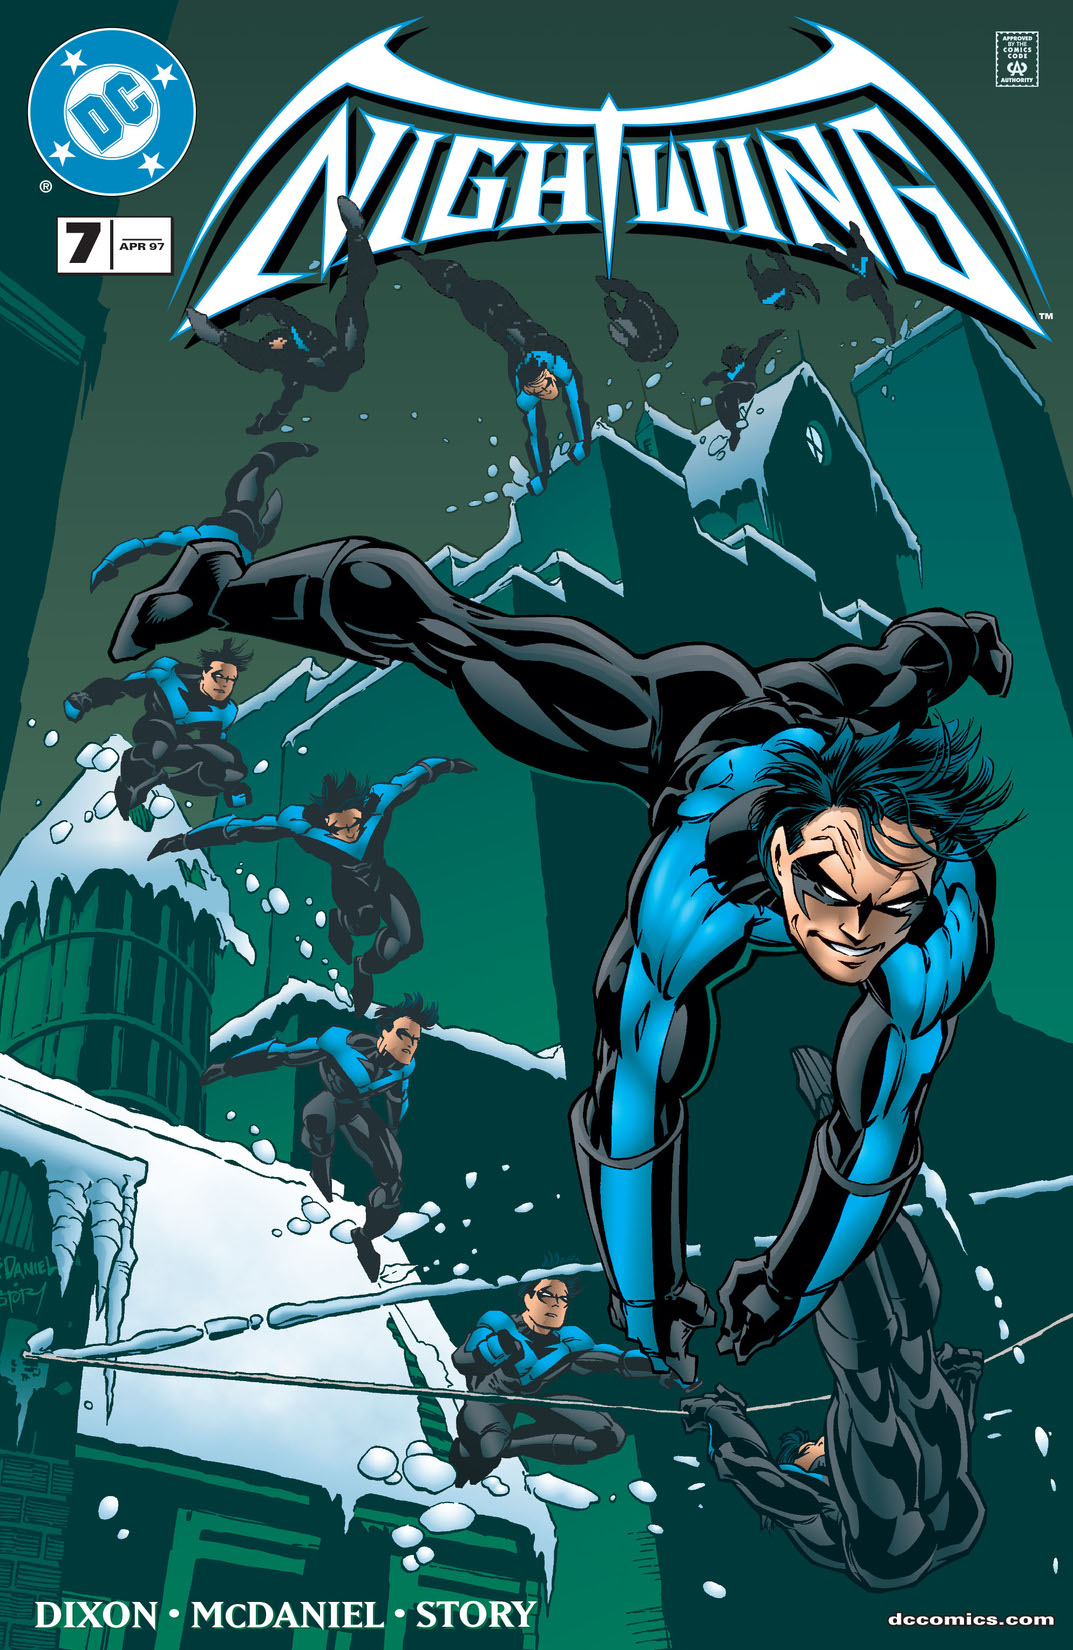 Nightwing (1996-) #7 preview images